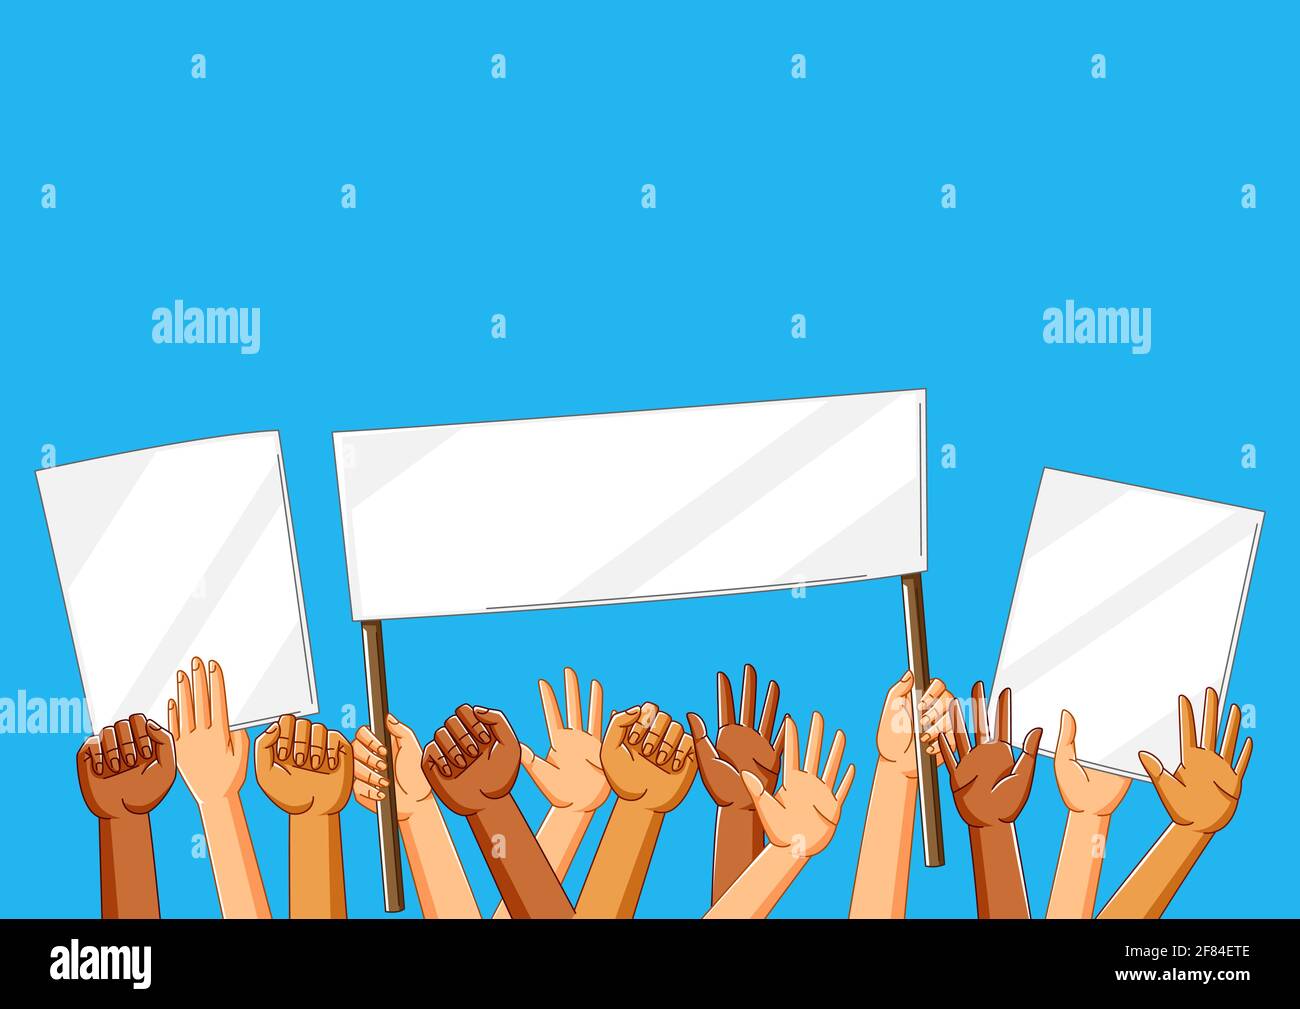 Illustration of hands with banners. Picket signs or protest placards on demonstration or protest. Stock Vector